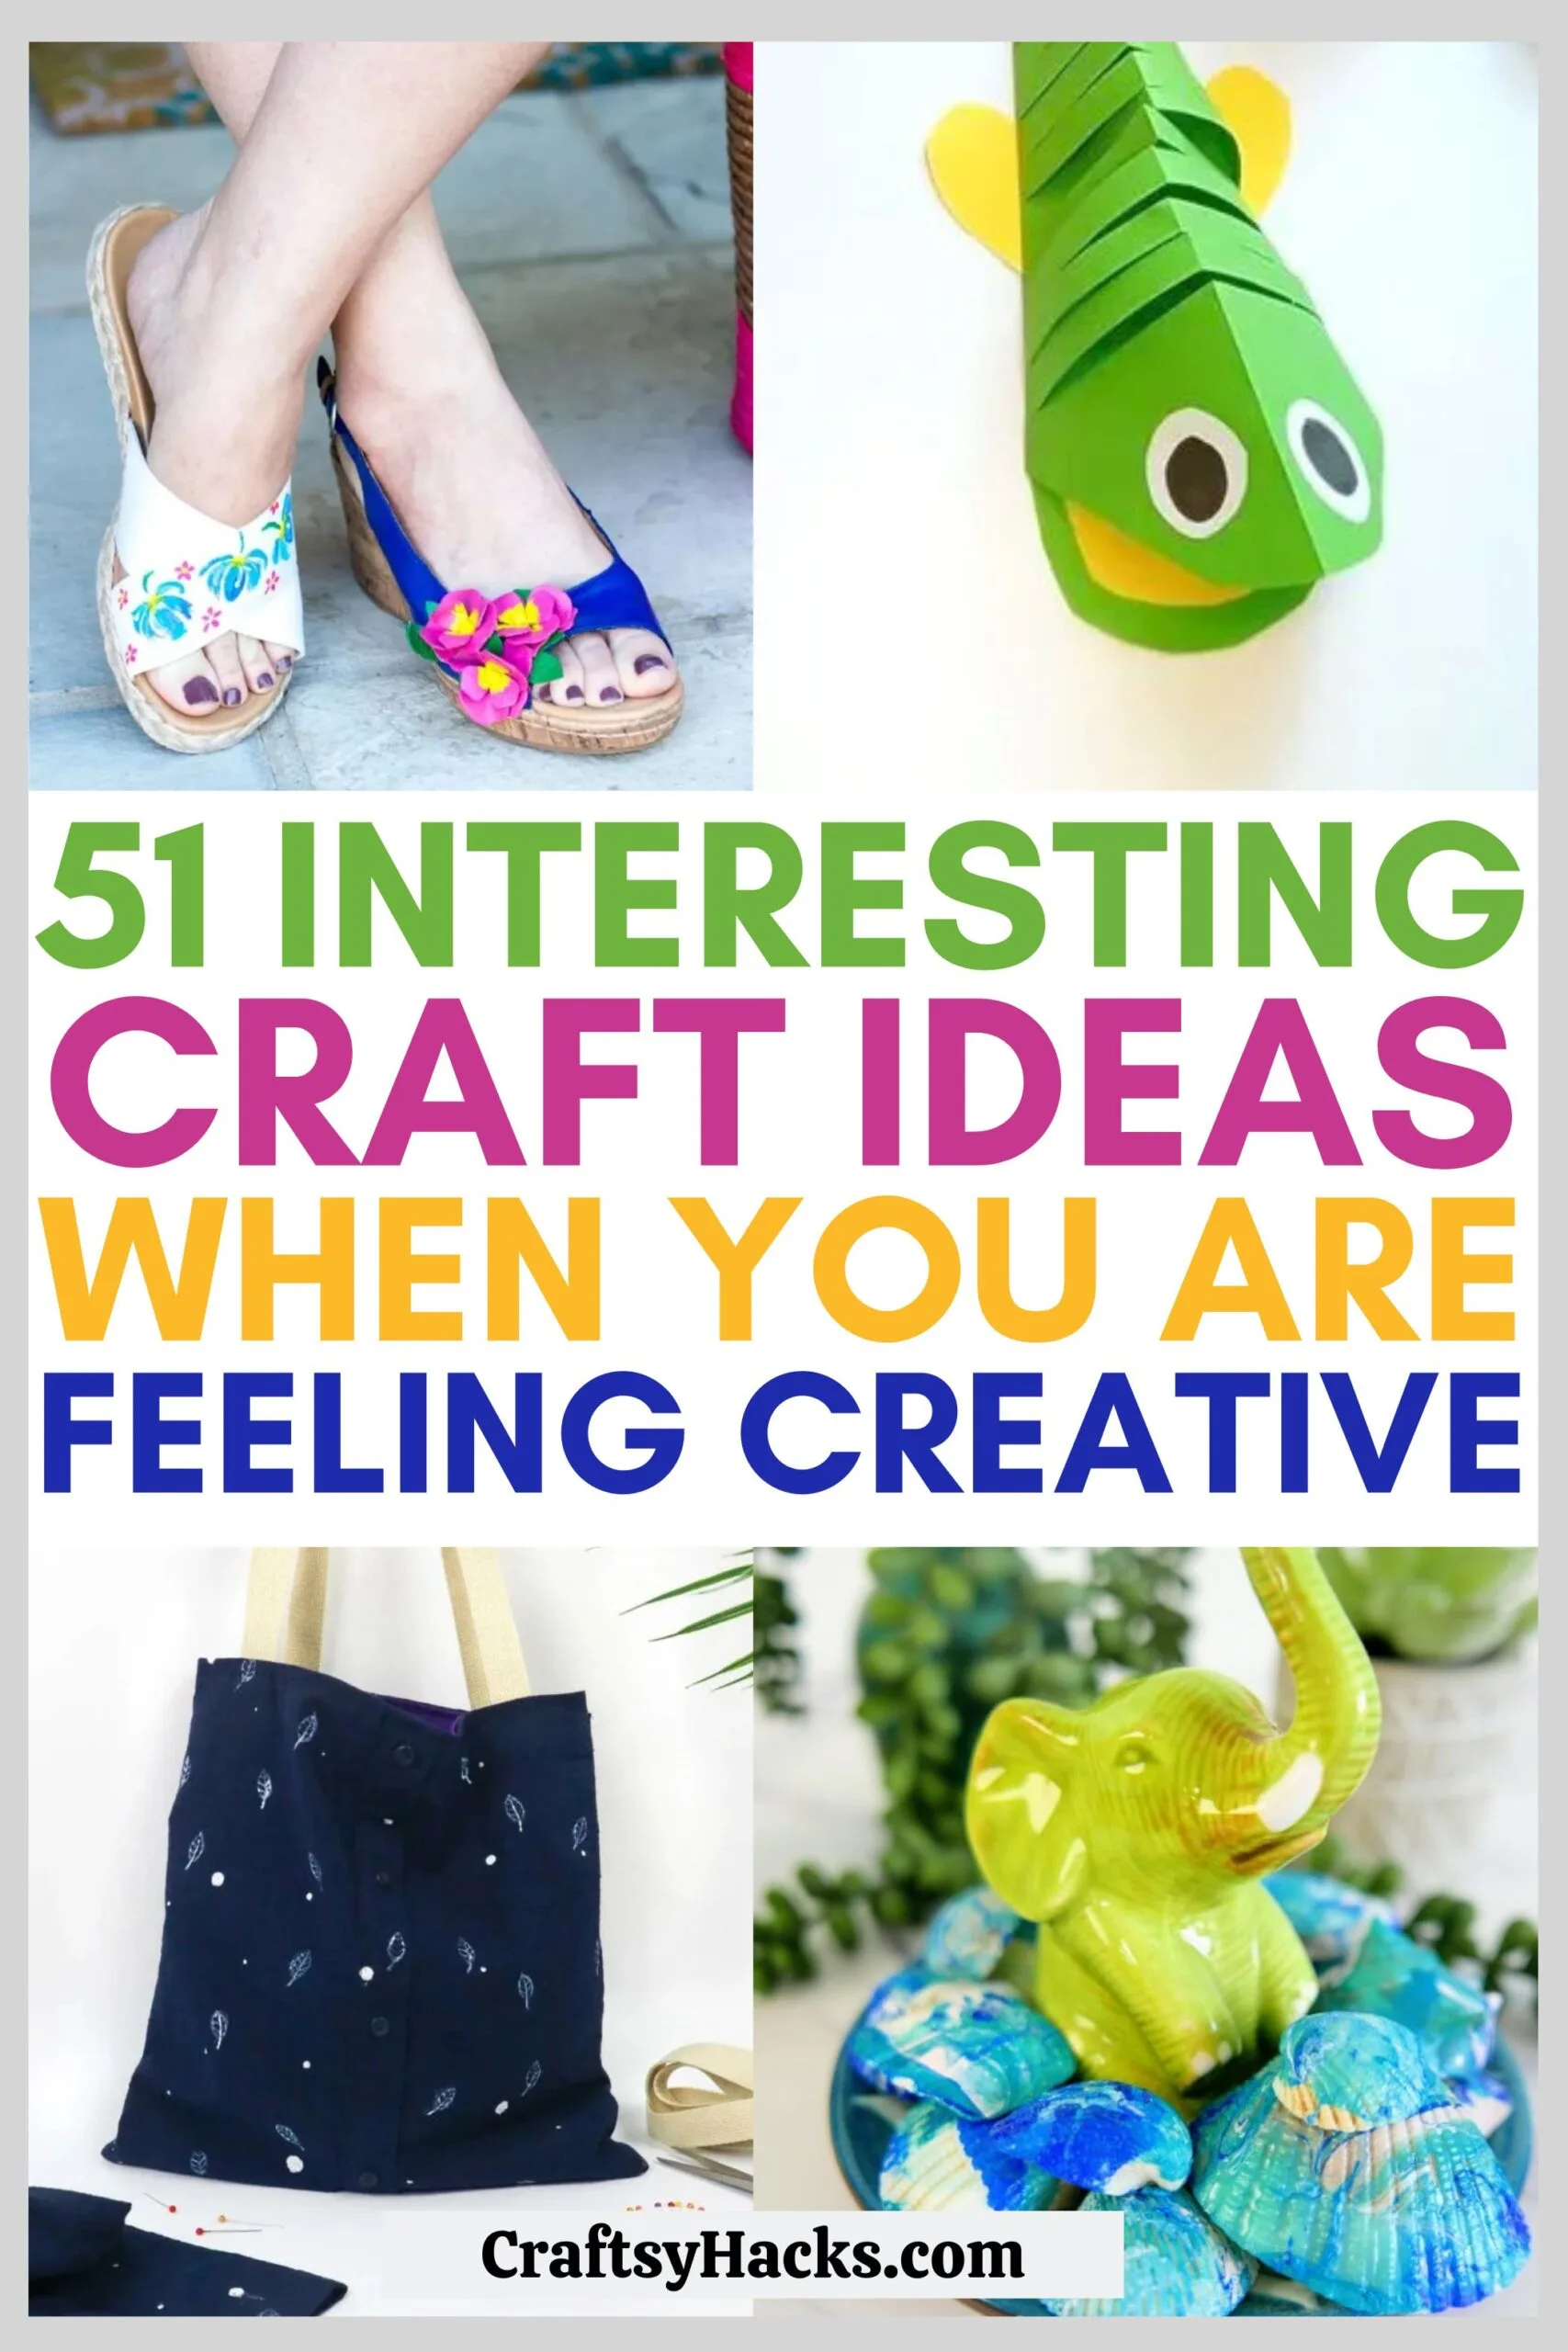 21+ Crafts and Activities for What to Do When Your Bored for Kids